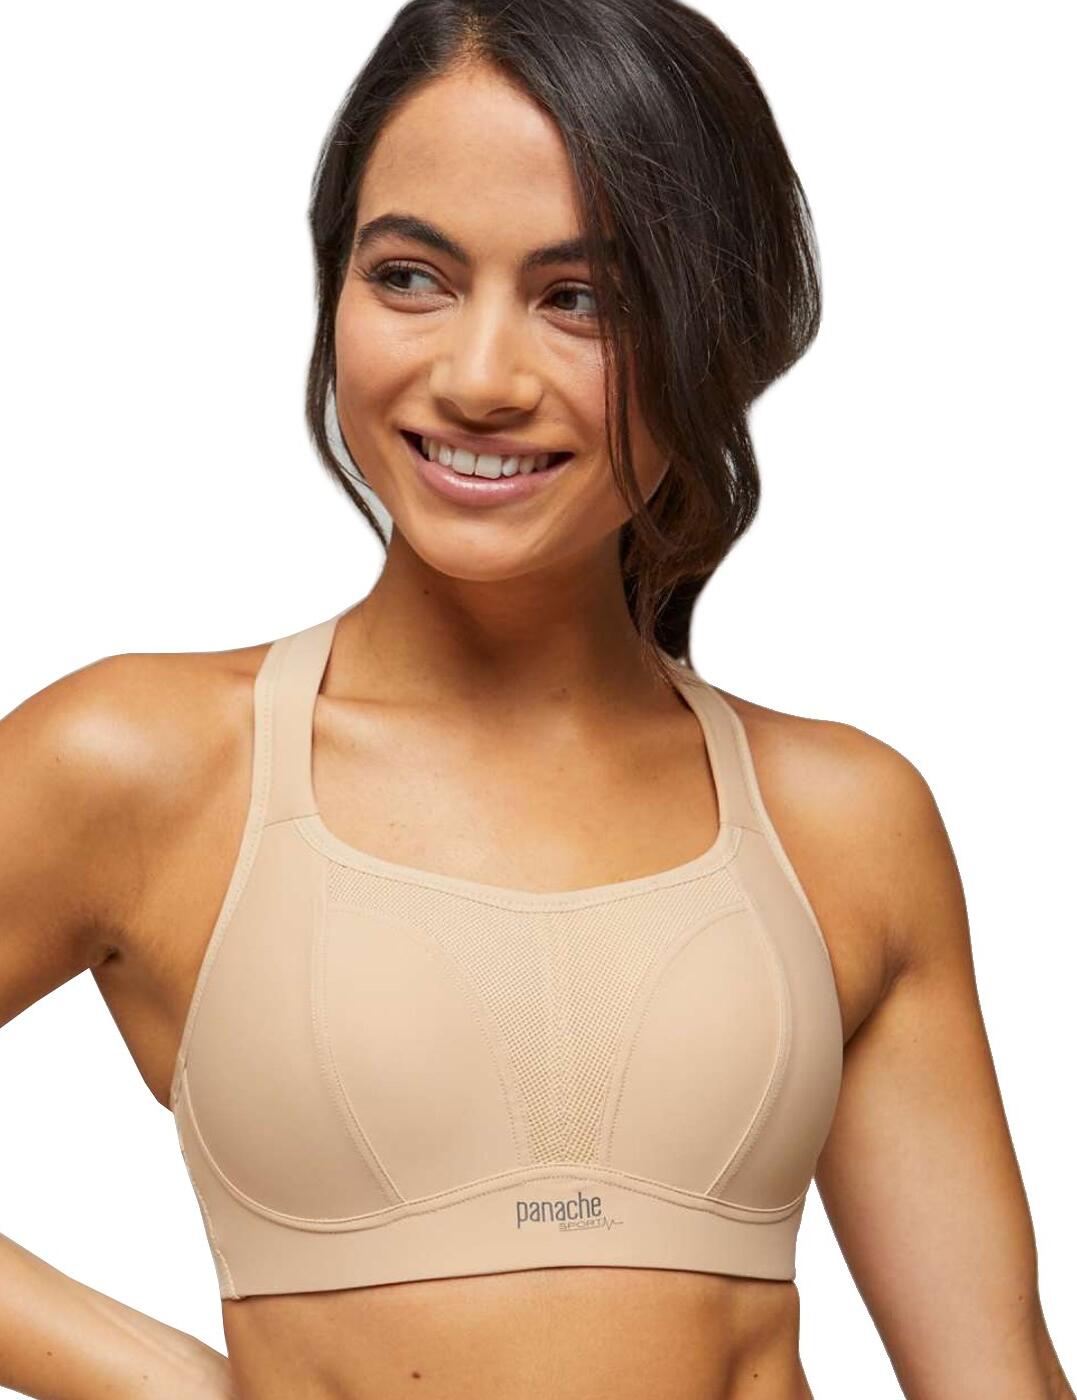 Panache Padded Sports Bra Non Wired Moulded Cup Sport Bras 7341A Activewear 